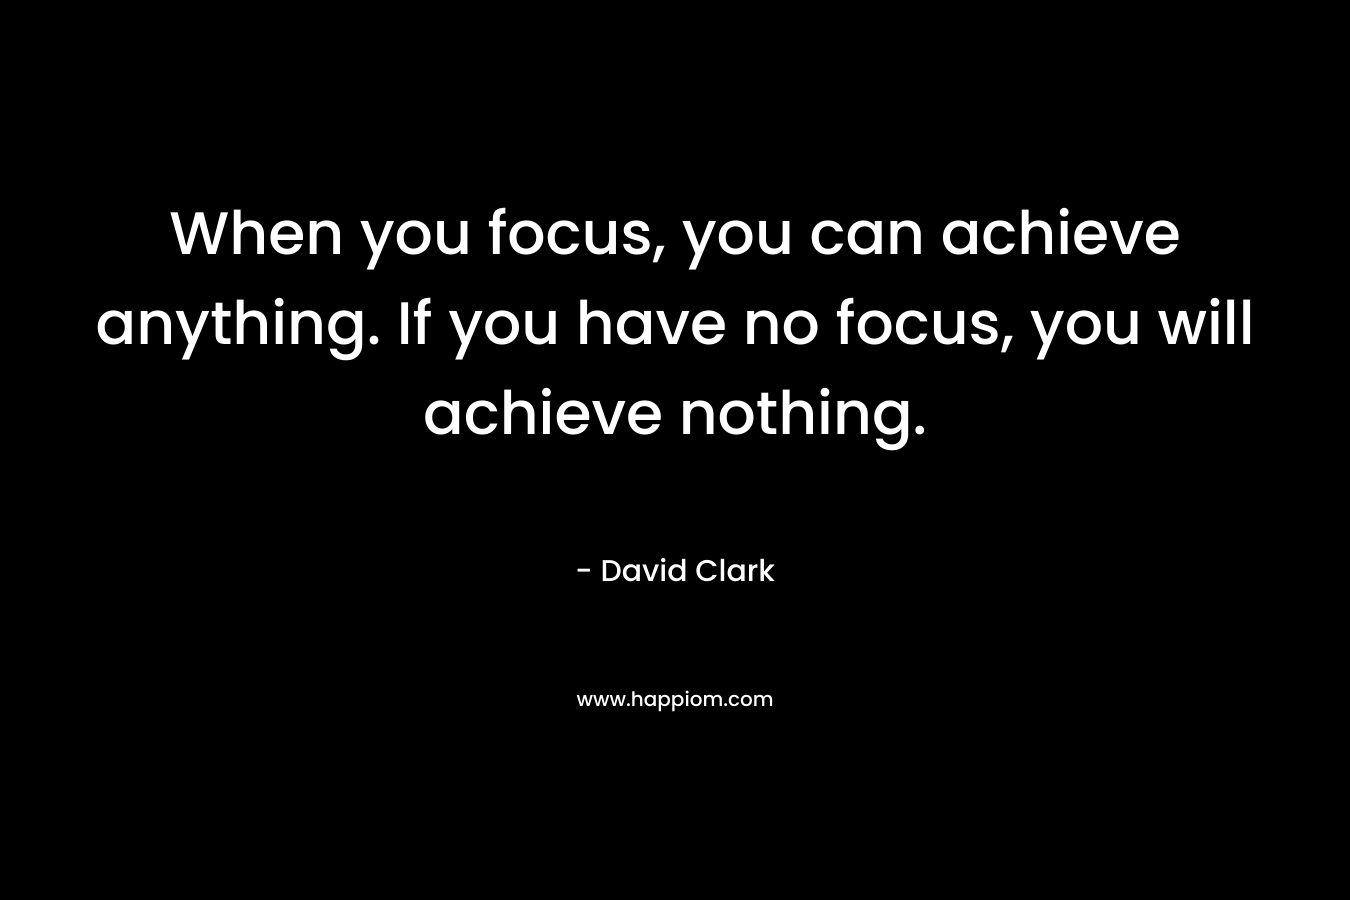 When you focus, you can achieve anything. If you have no focus, you will achieve nothing.